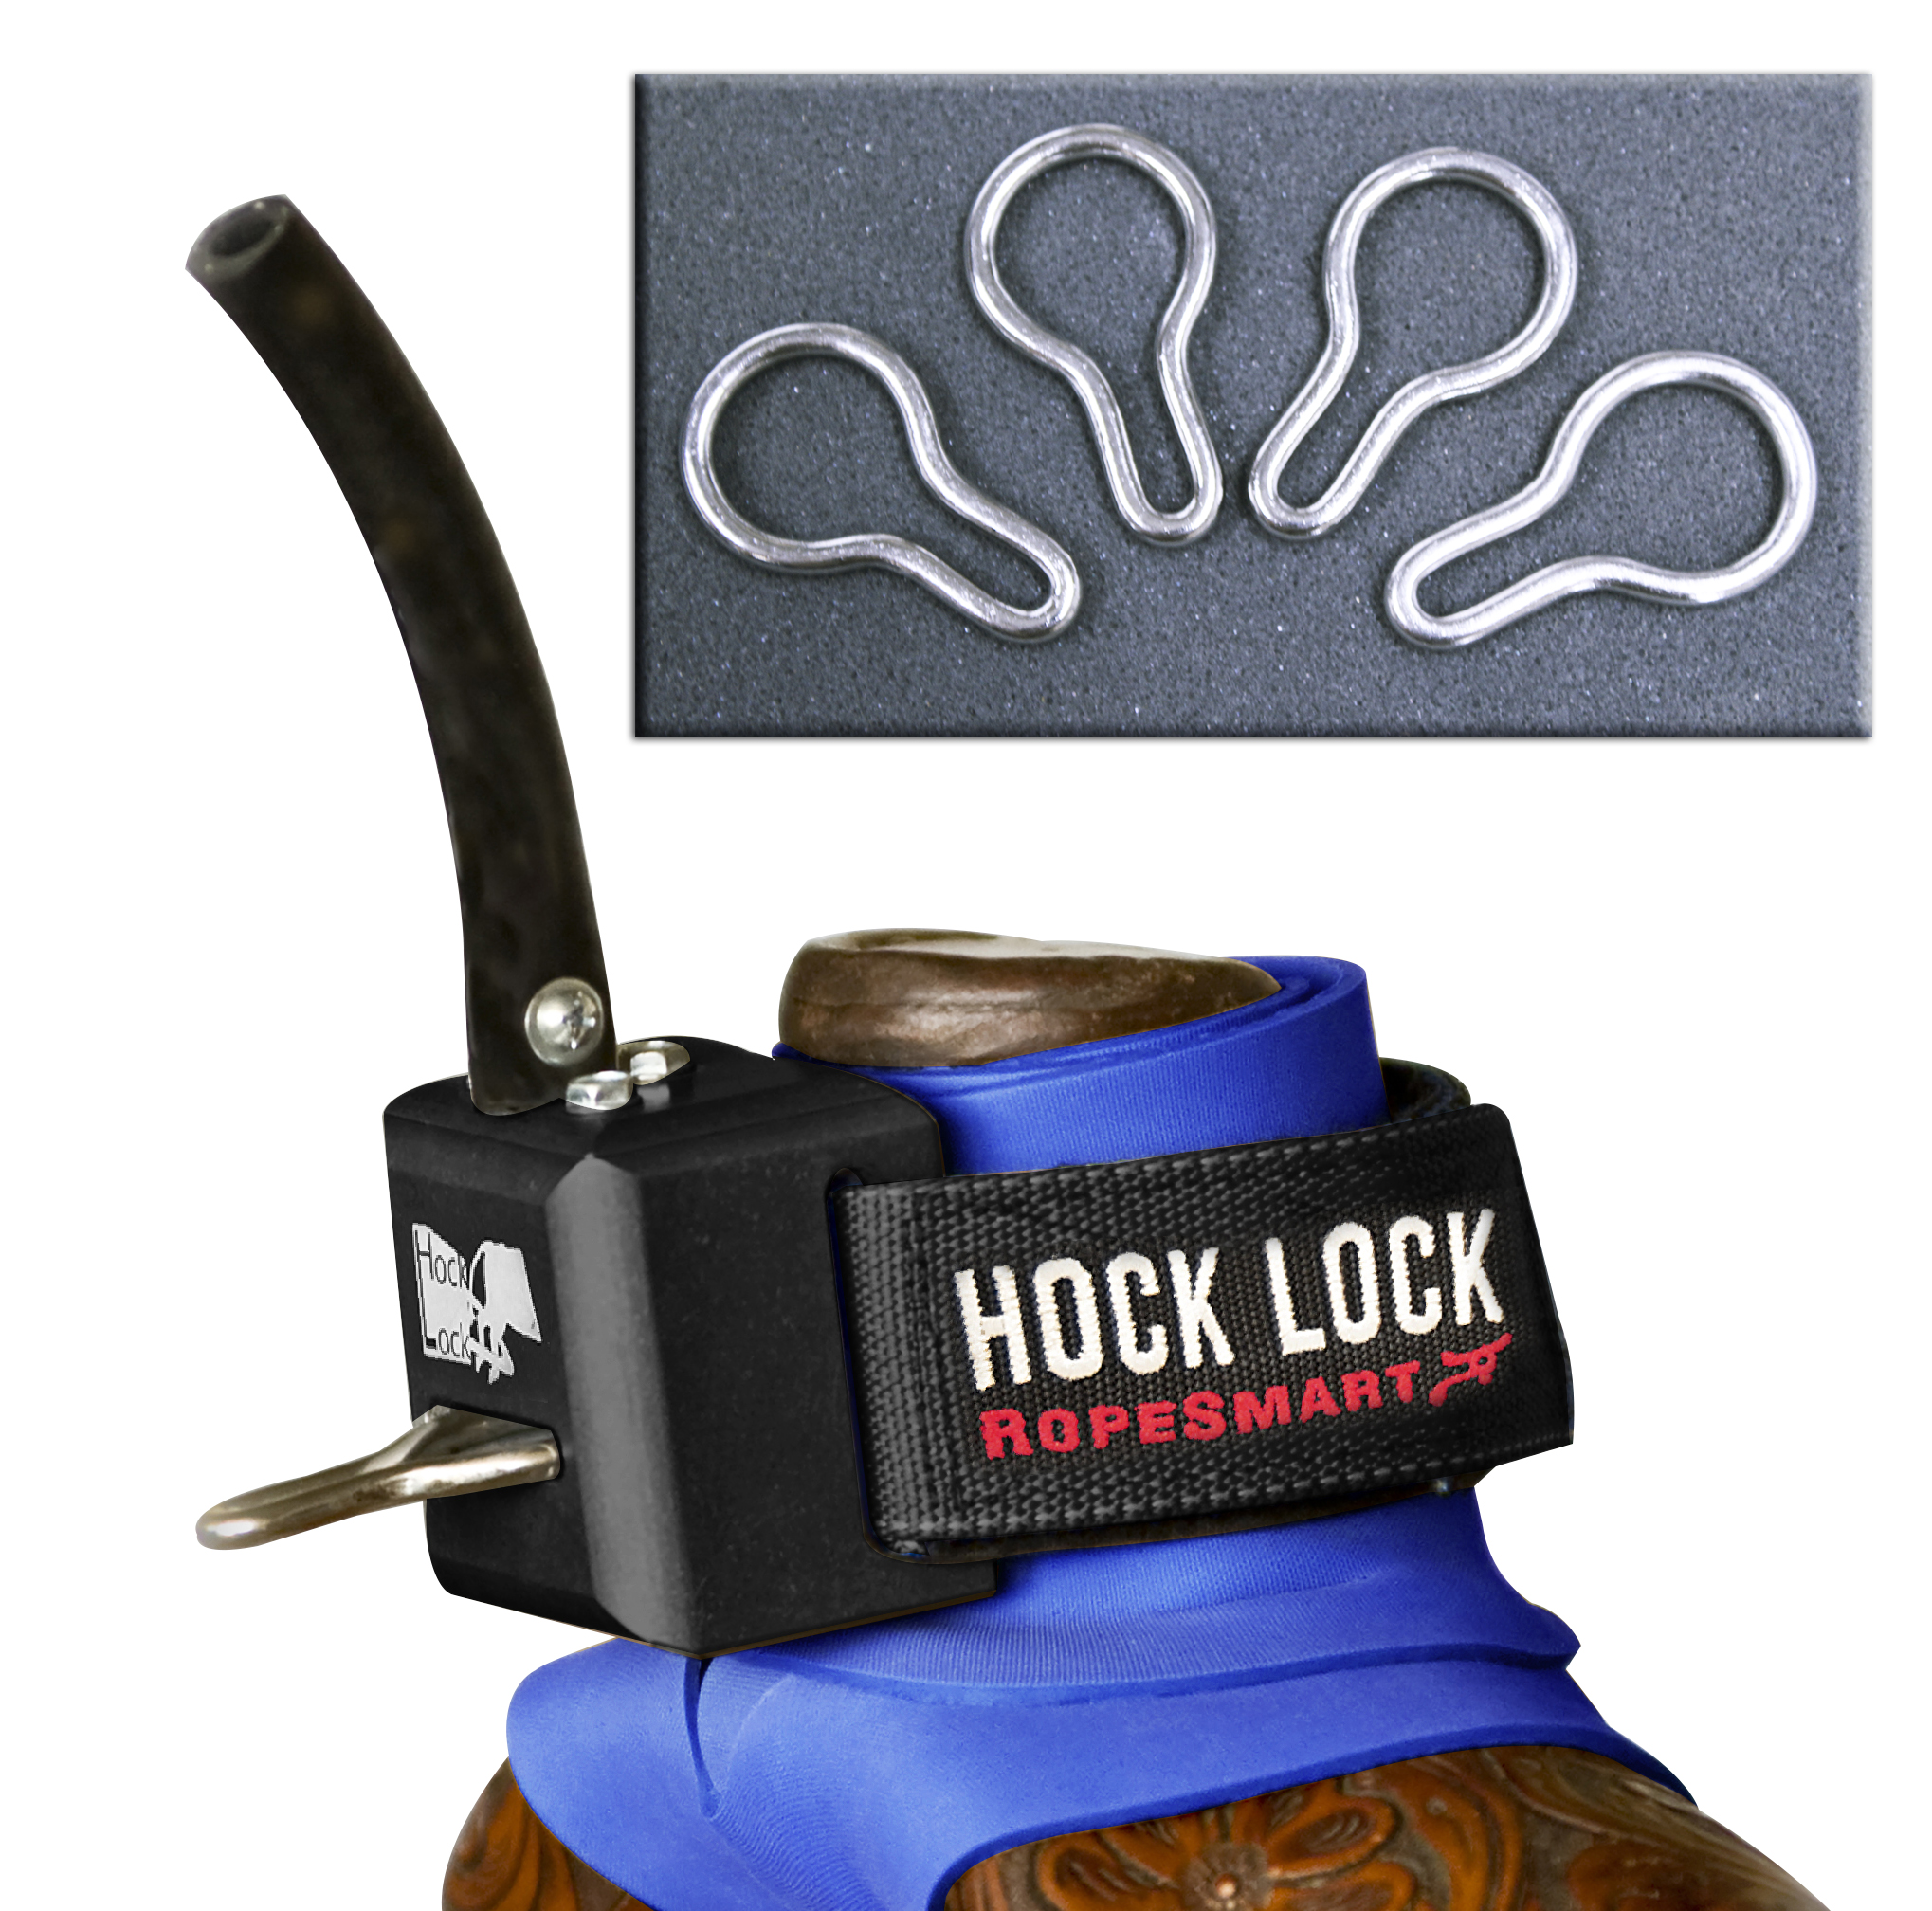 Hock Lock Spare Rings, 3 for $15